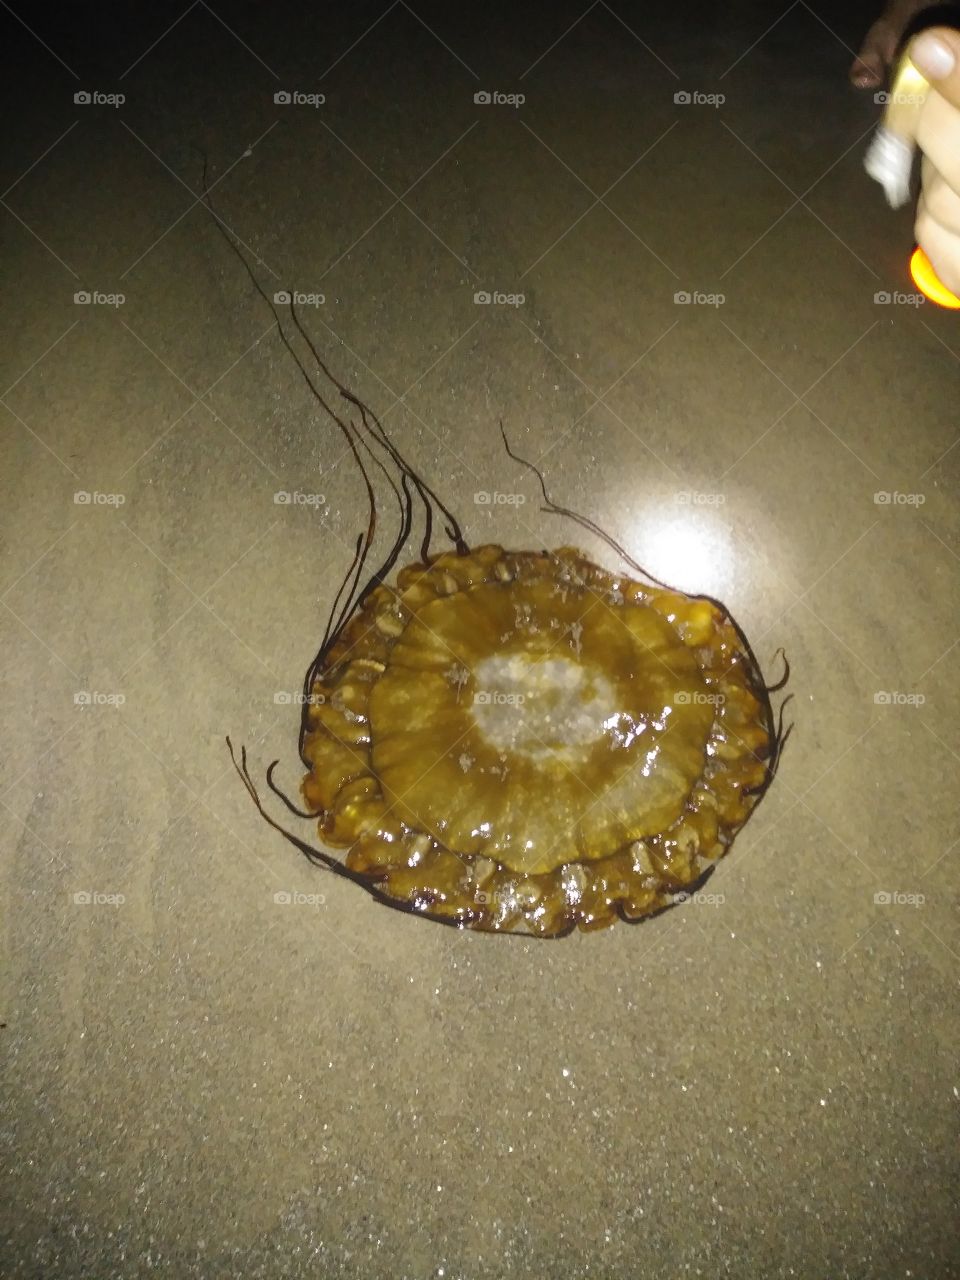 A jelly fish washed up at night